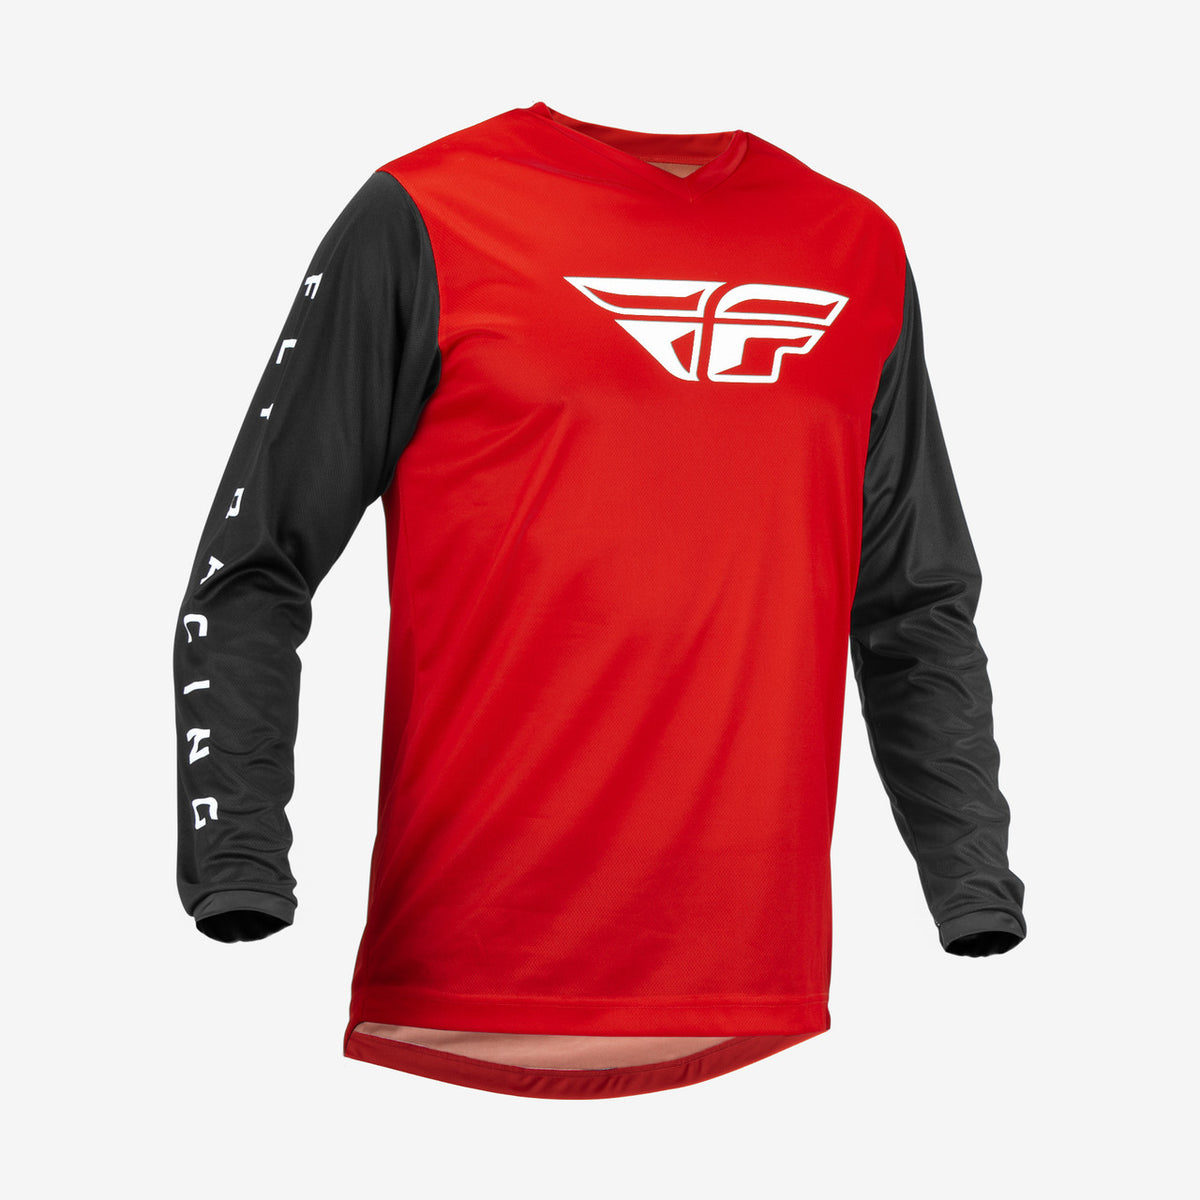 Maillot Cross Fly Racing F-16